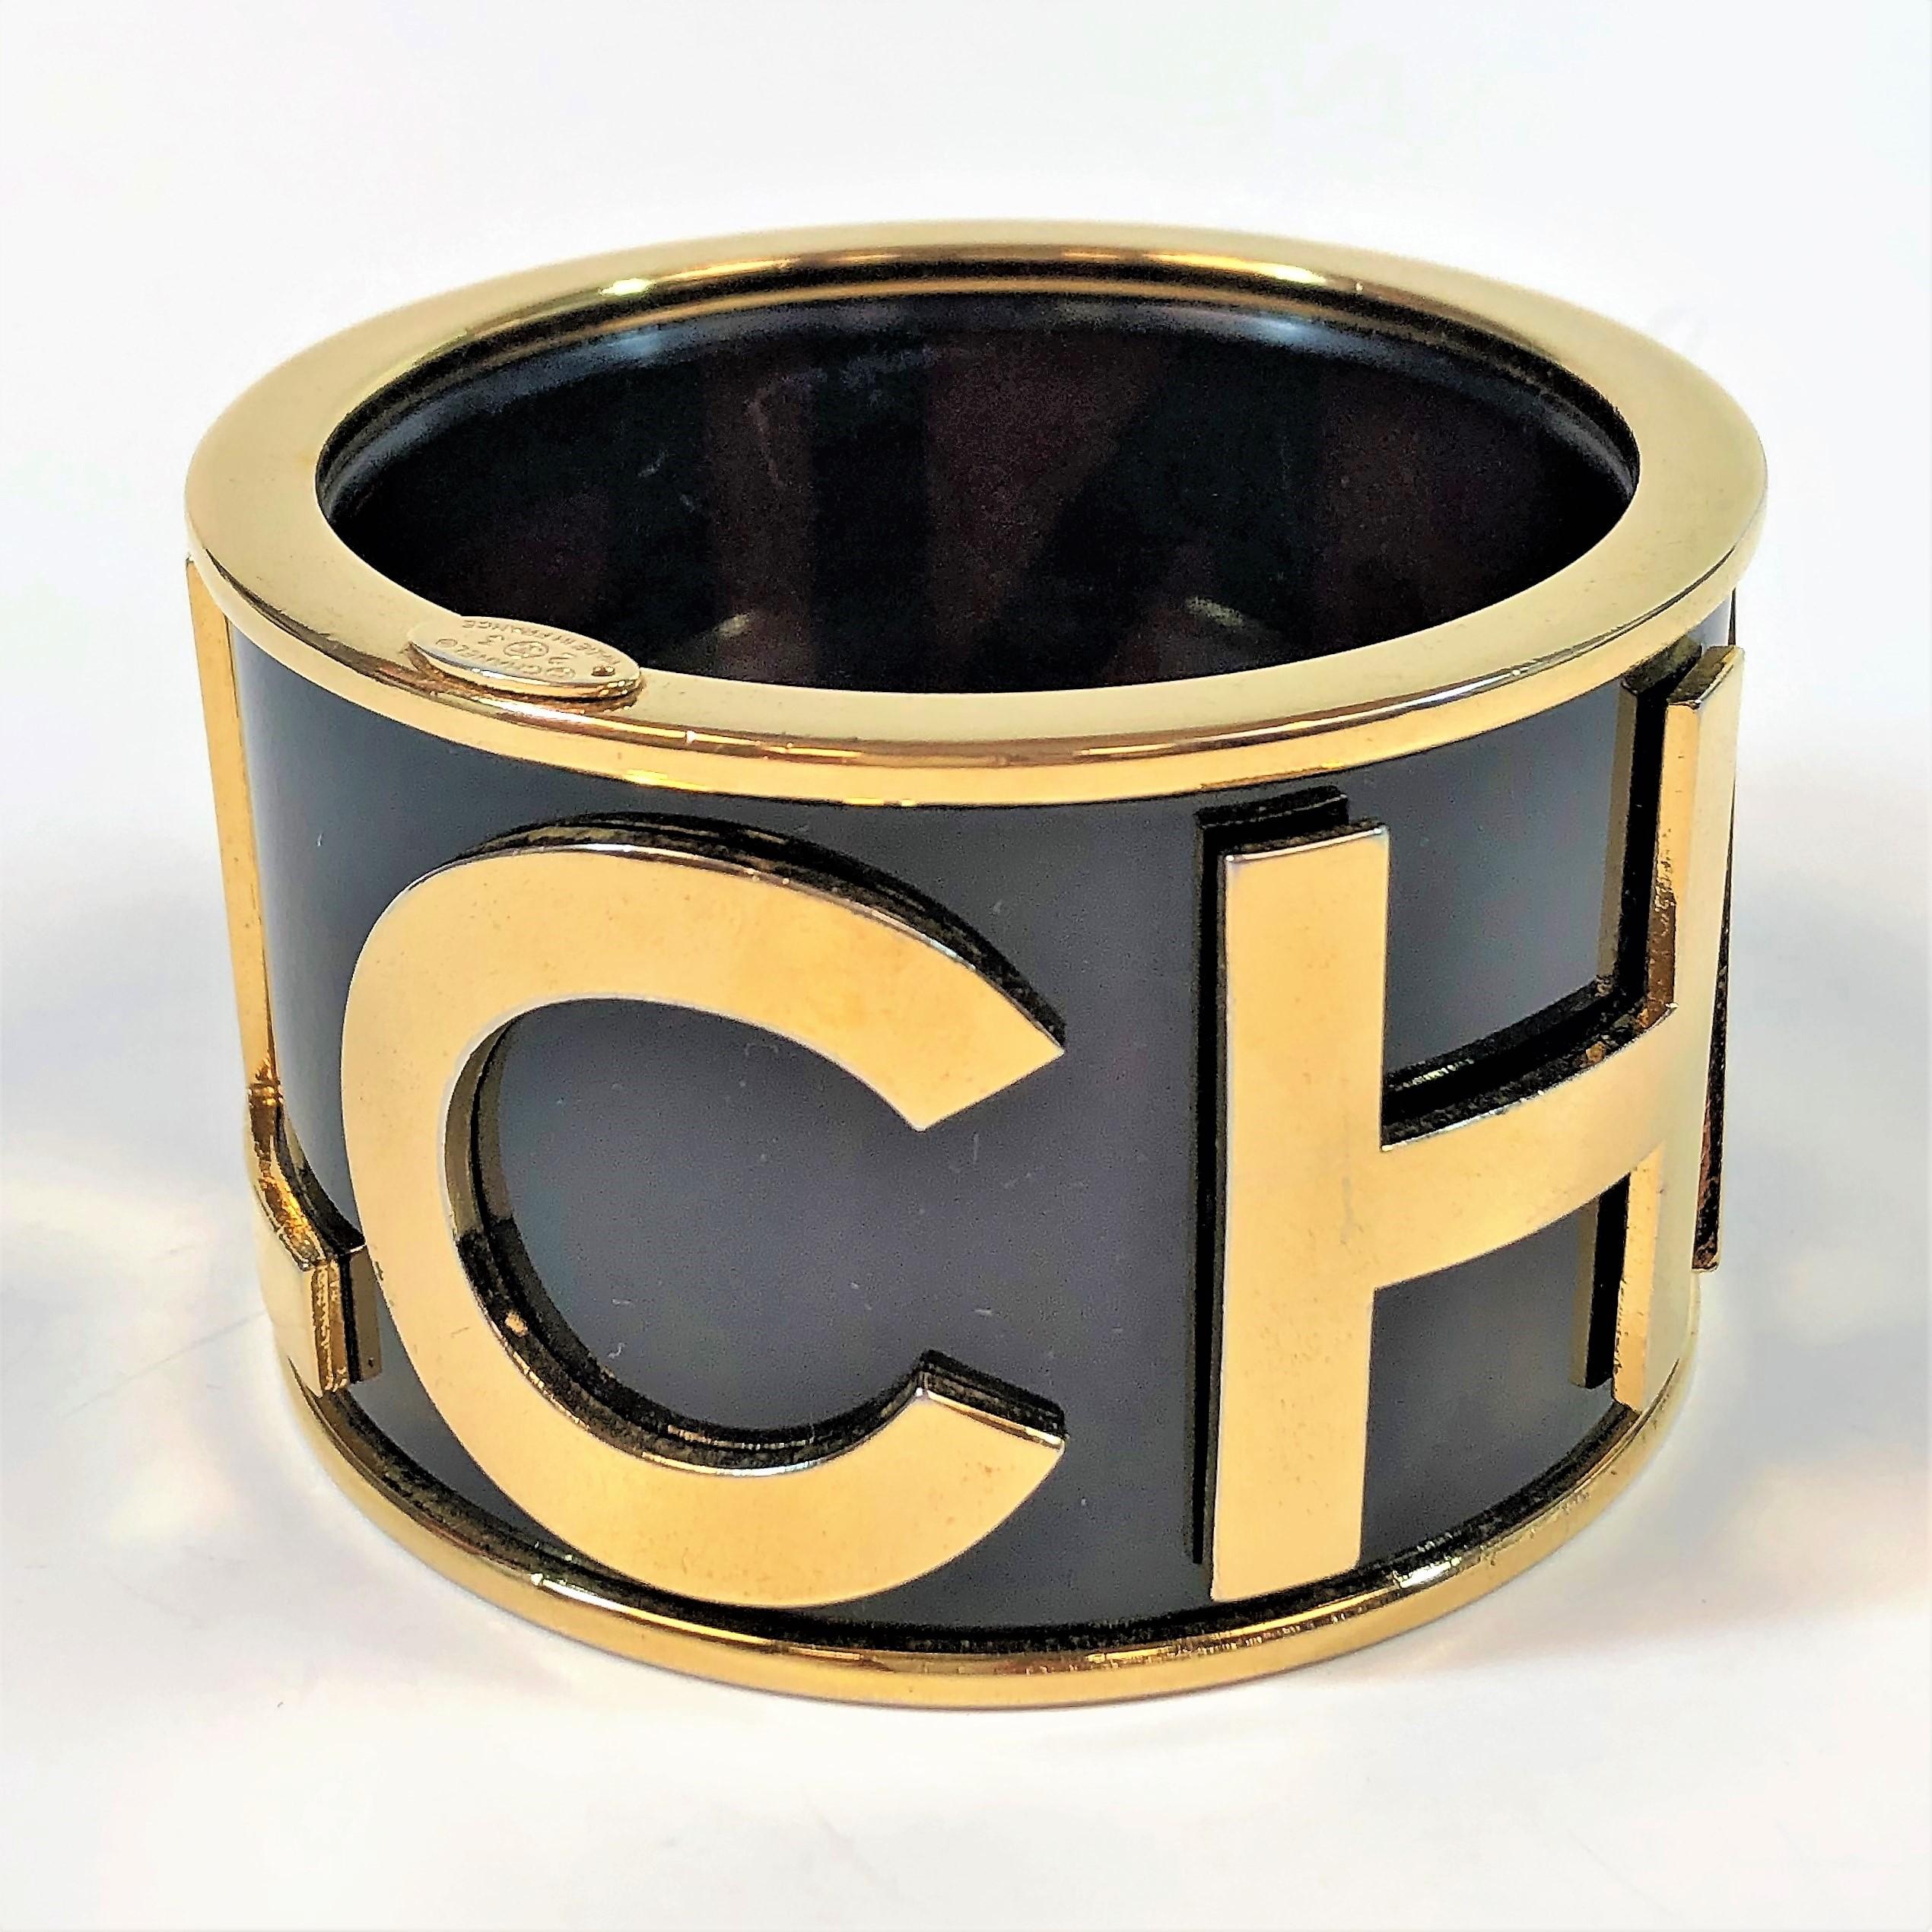 Runway 1986 Season 23 previewed this large size (just under 2 inches wide) 
Cuff/Bangle. The black background is accented with 1  1/2 inch high
gold tone capital letters spelling out the word C H A N E L. The top and bottom 
are capped with the same